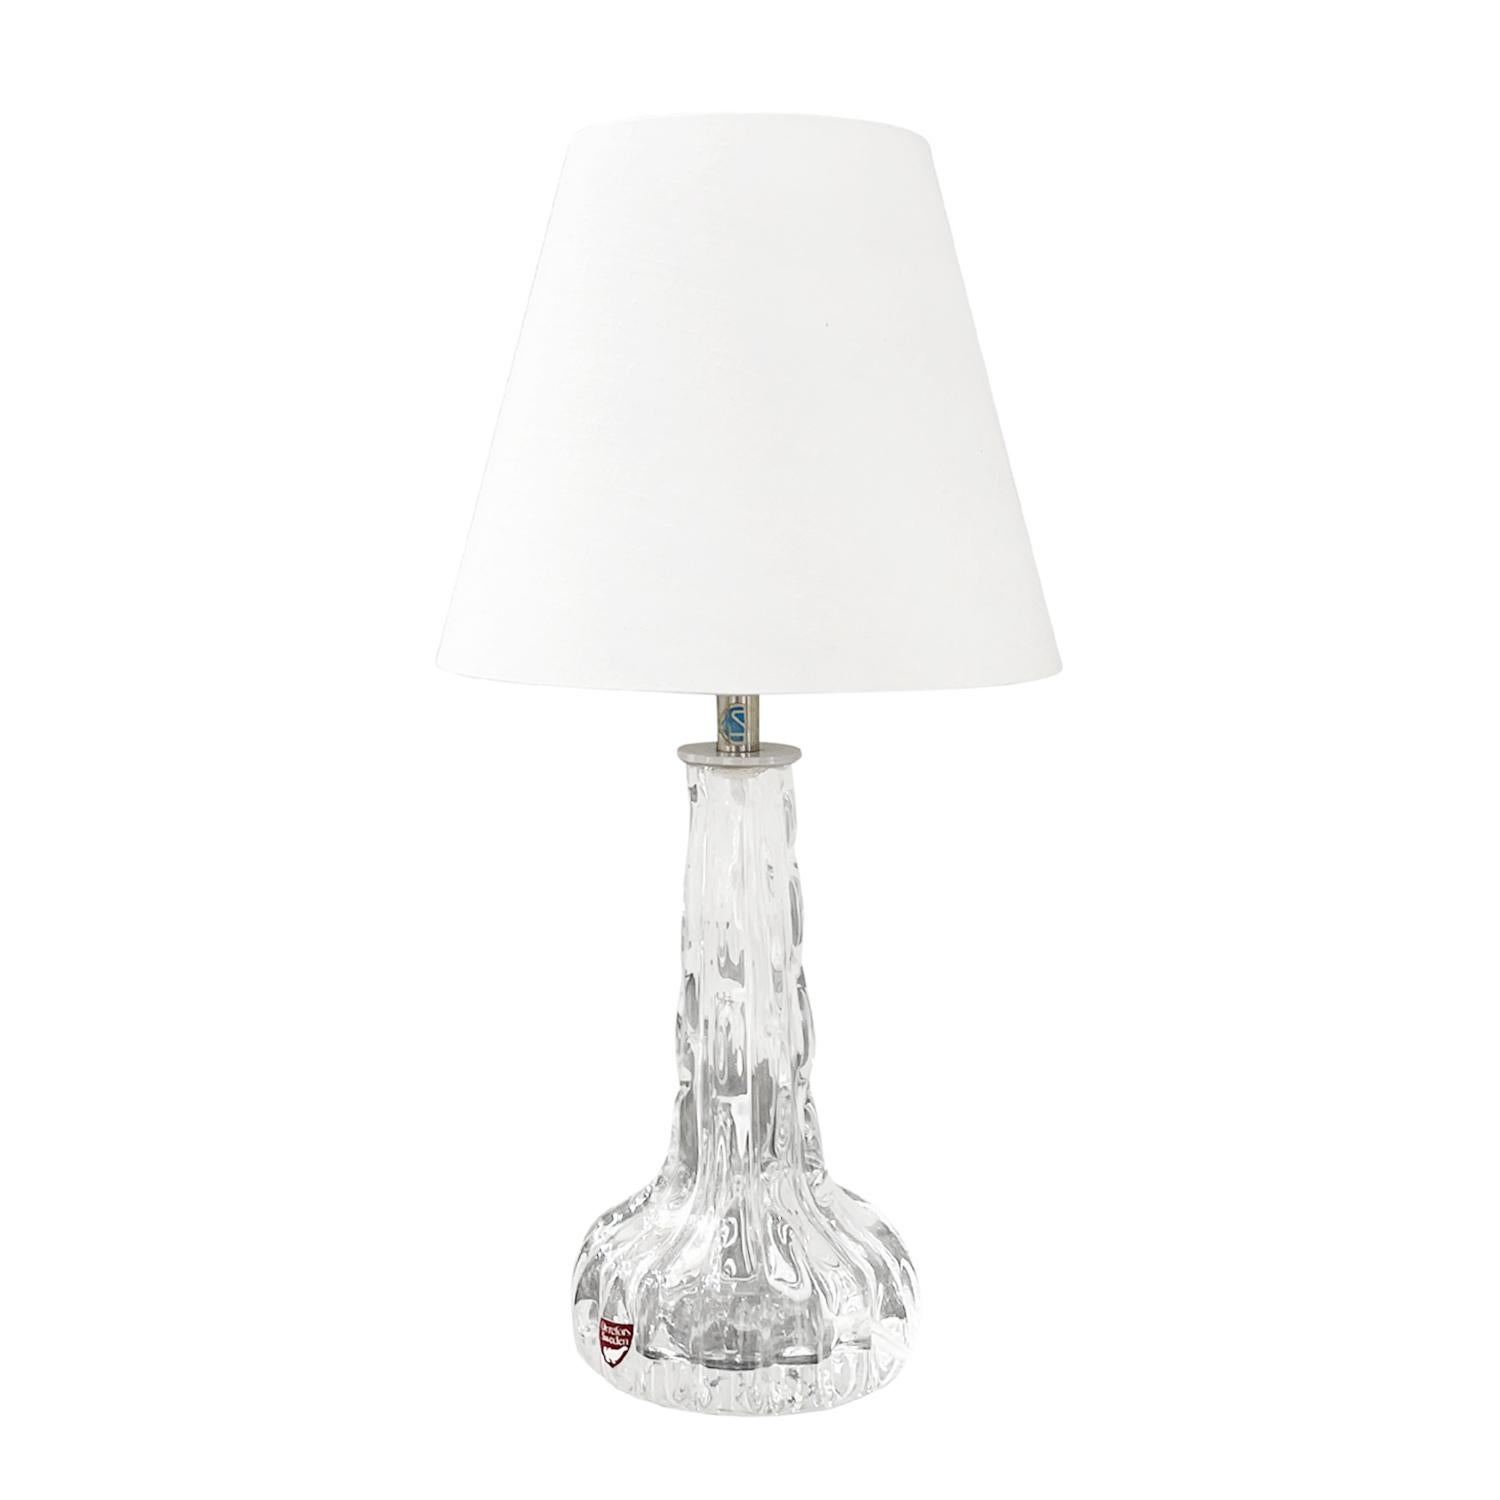 A vintage Mid-Century Modern Swedish office light with a new white round shade made of hand blown slightly smoked Orrefors glass, designed by Carl Fagerlund and produced by Orrefors in good condition. The Scandinavian table, desk lamp is consisting